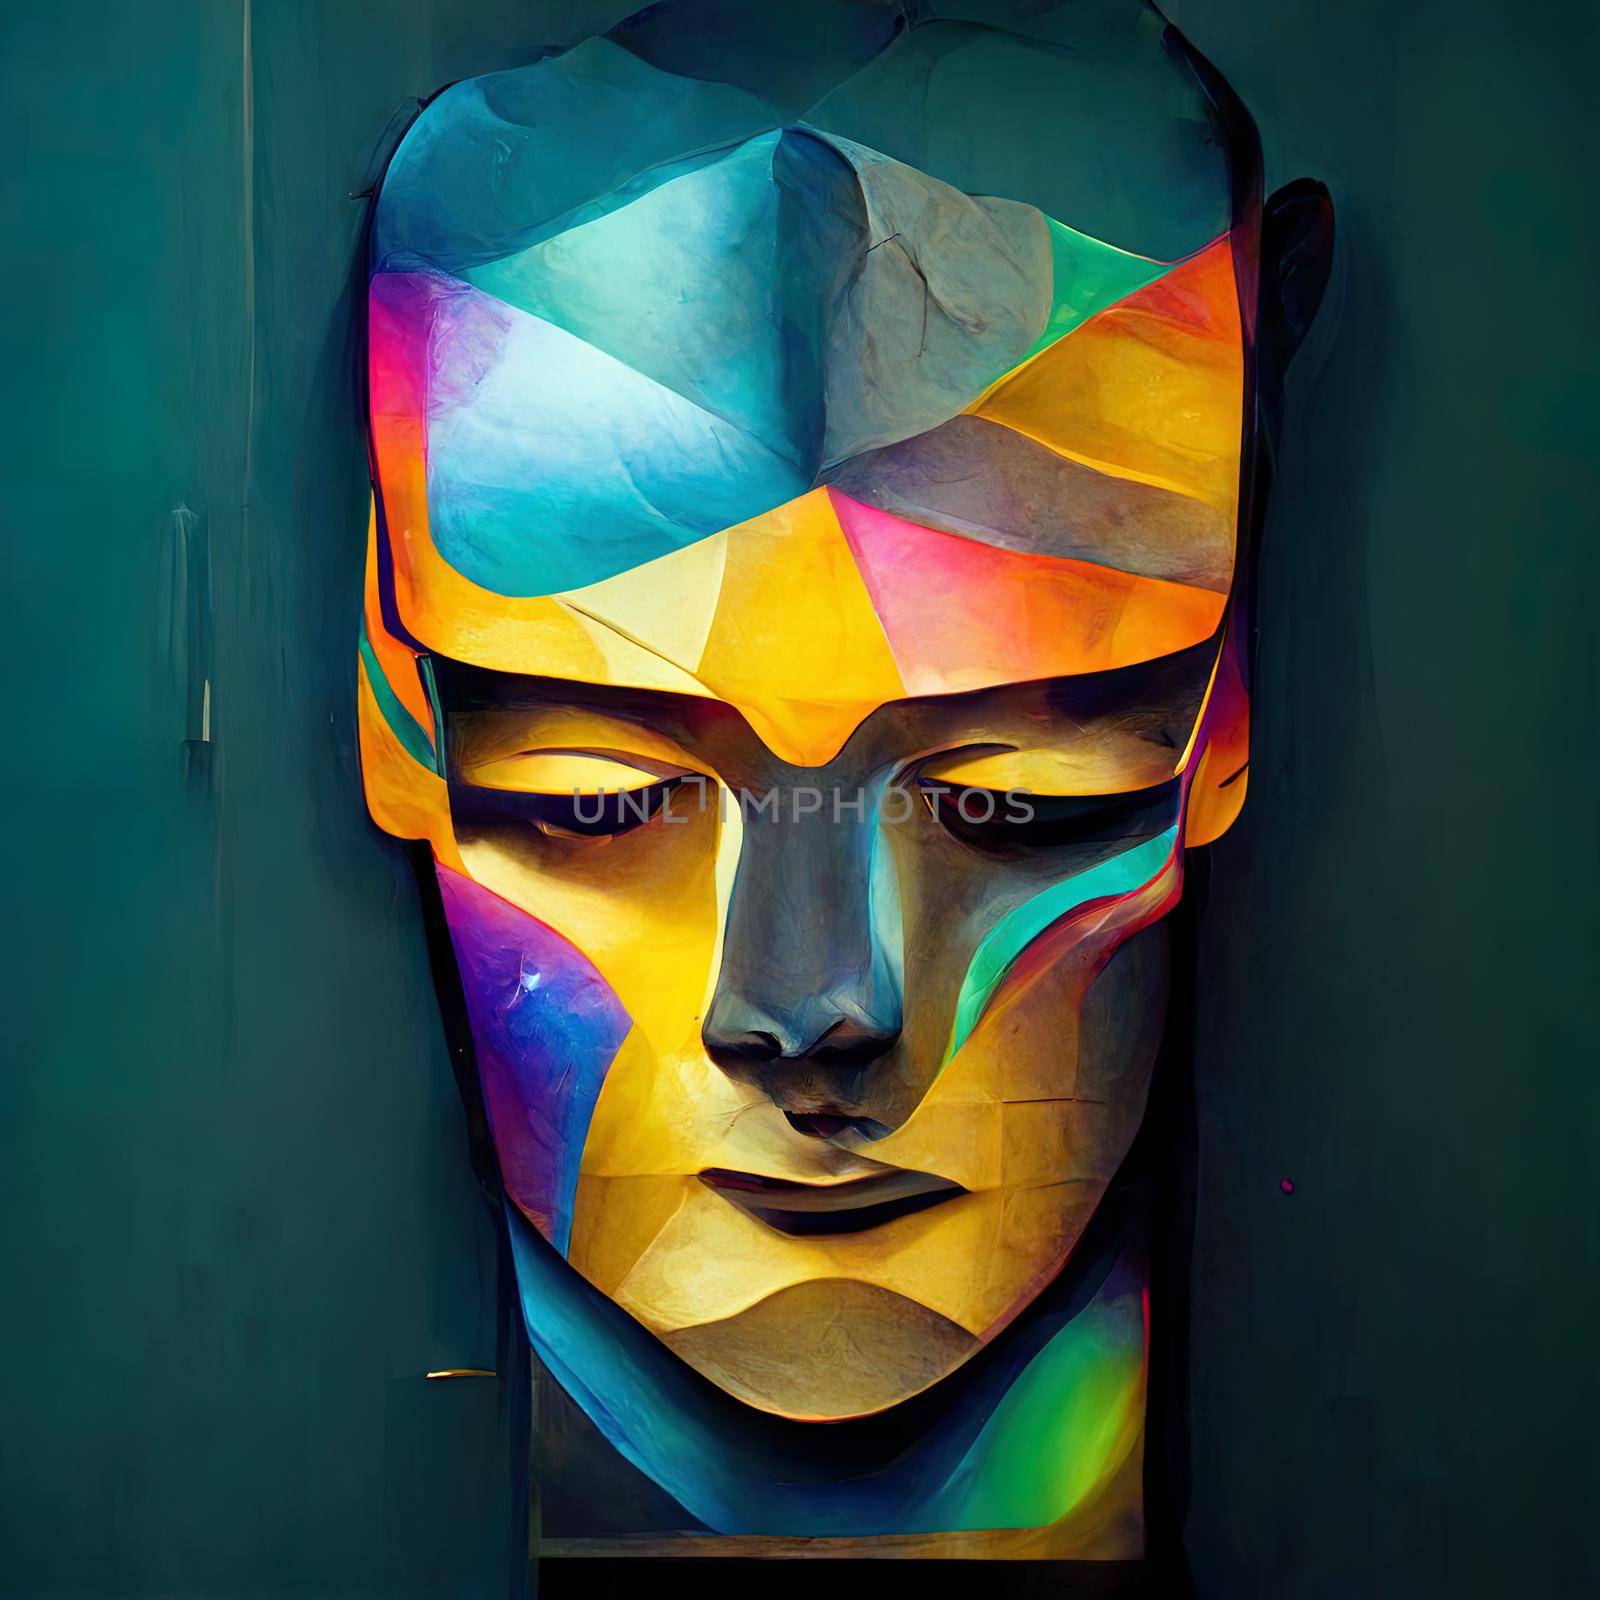 Abstract 3D render illustration of holographic human face in the wall by 2ragon